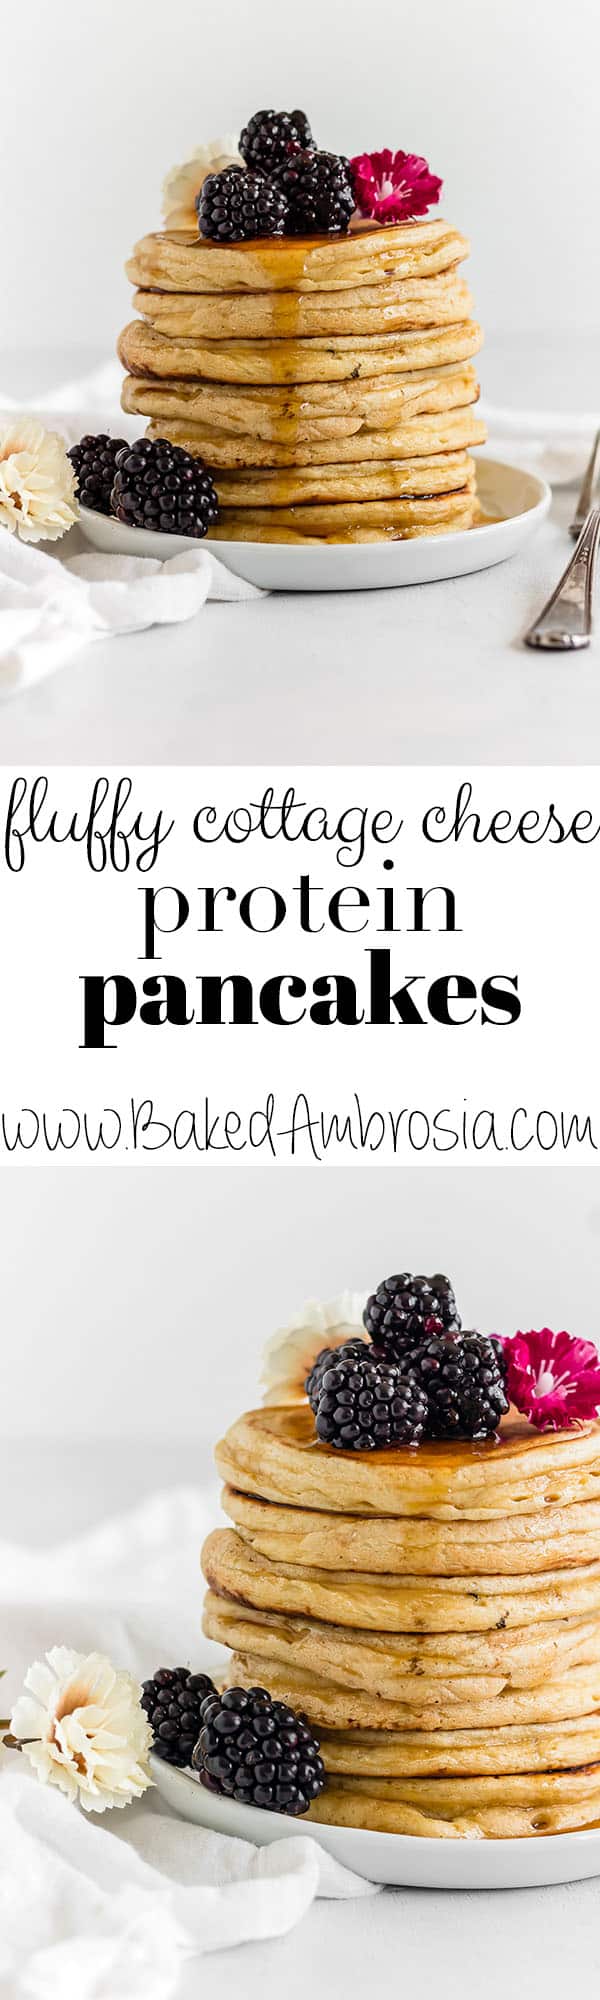 Fluffy Cottage Cheese Protein Pancakes